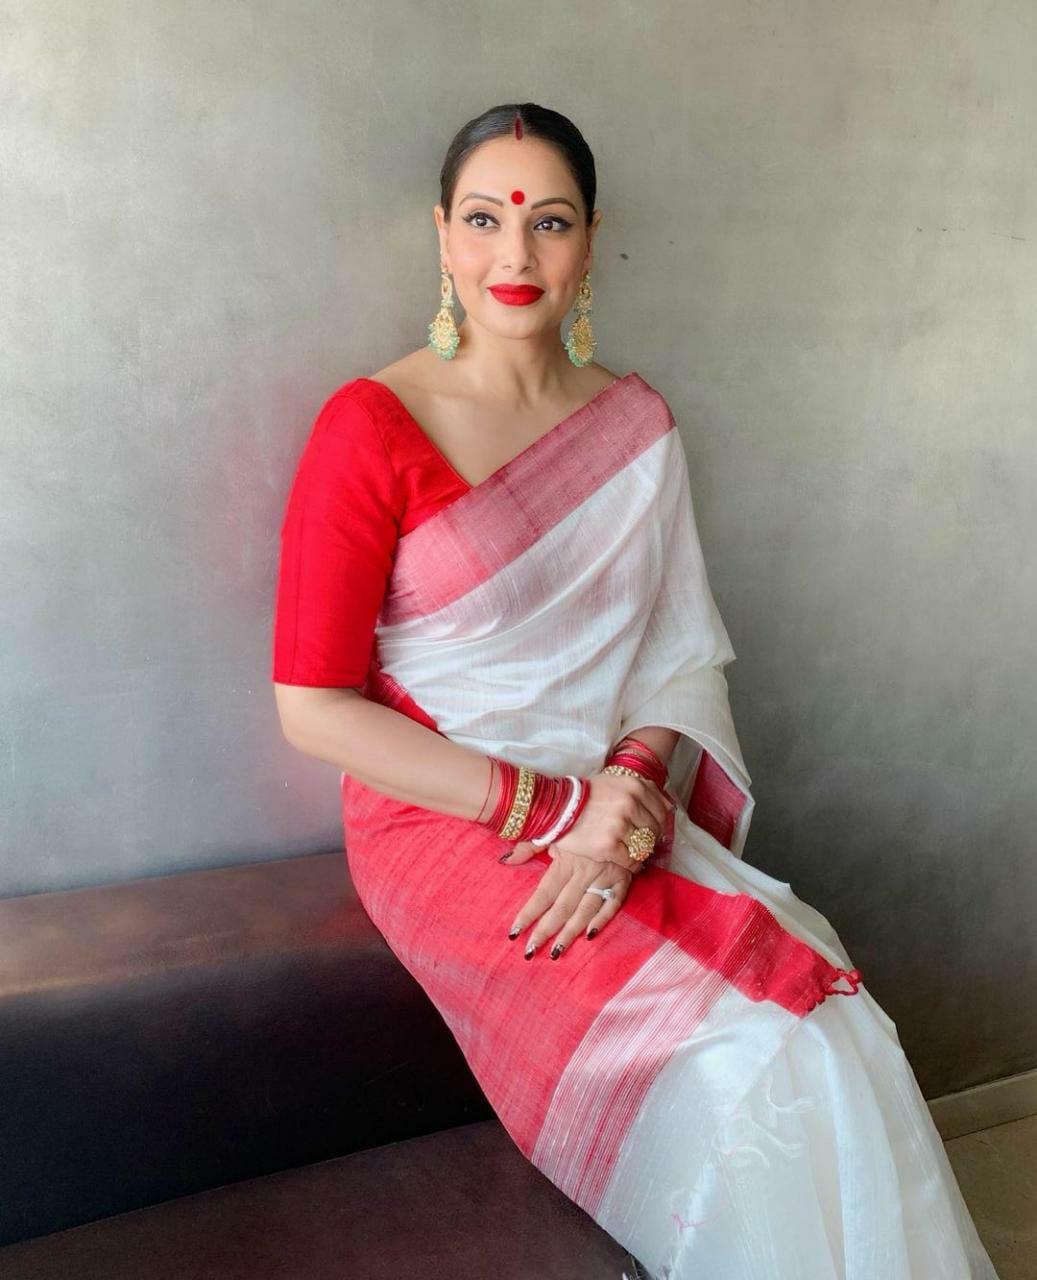 Bipasha Basu's beautiful outfit, with a red and white saree and a bold red bindi on her forehead, is a wonderful pick for Dashami.